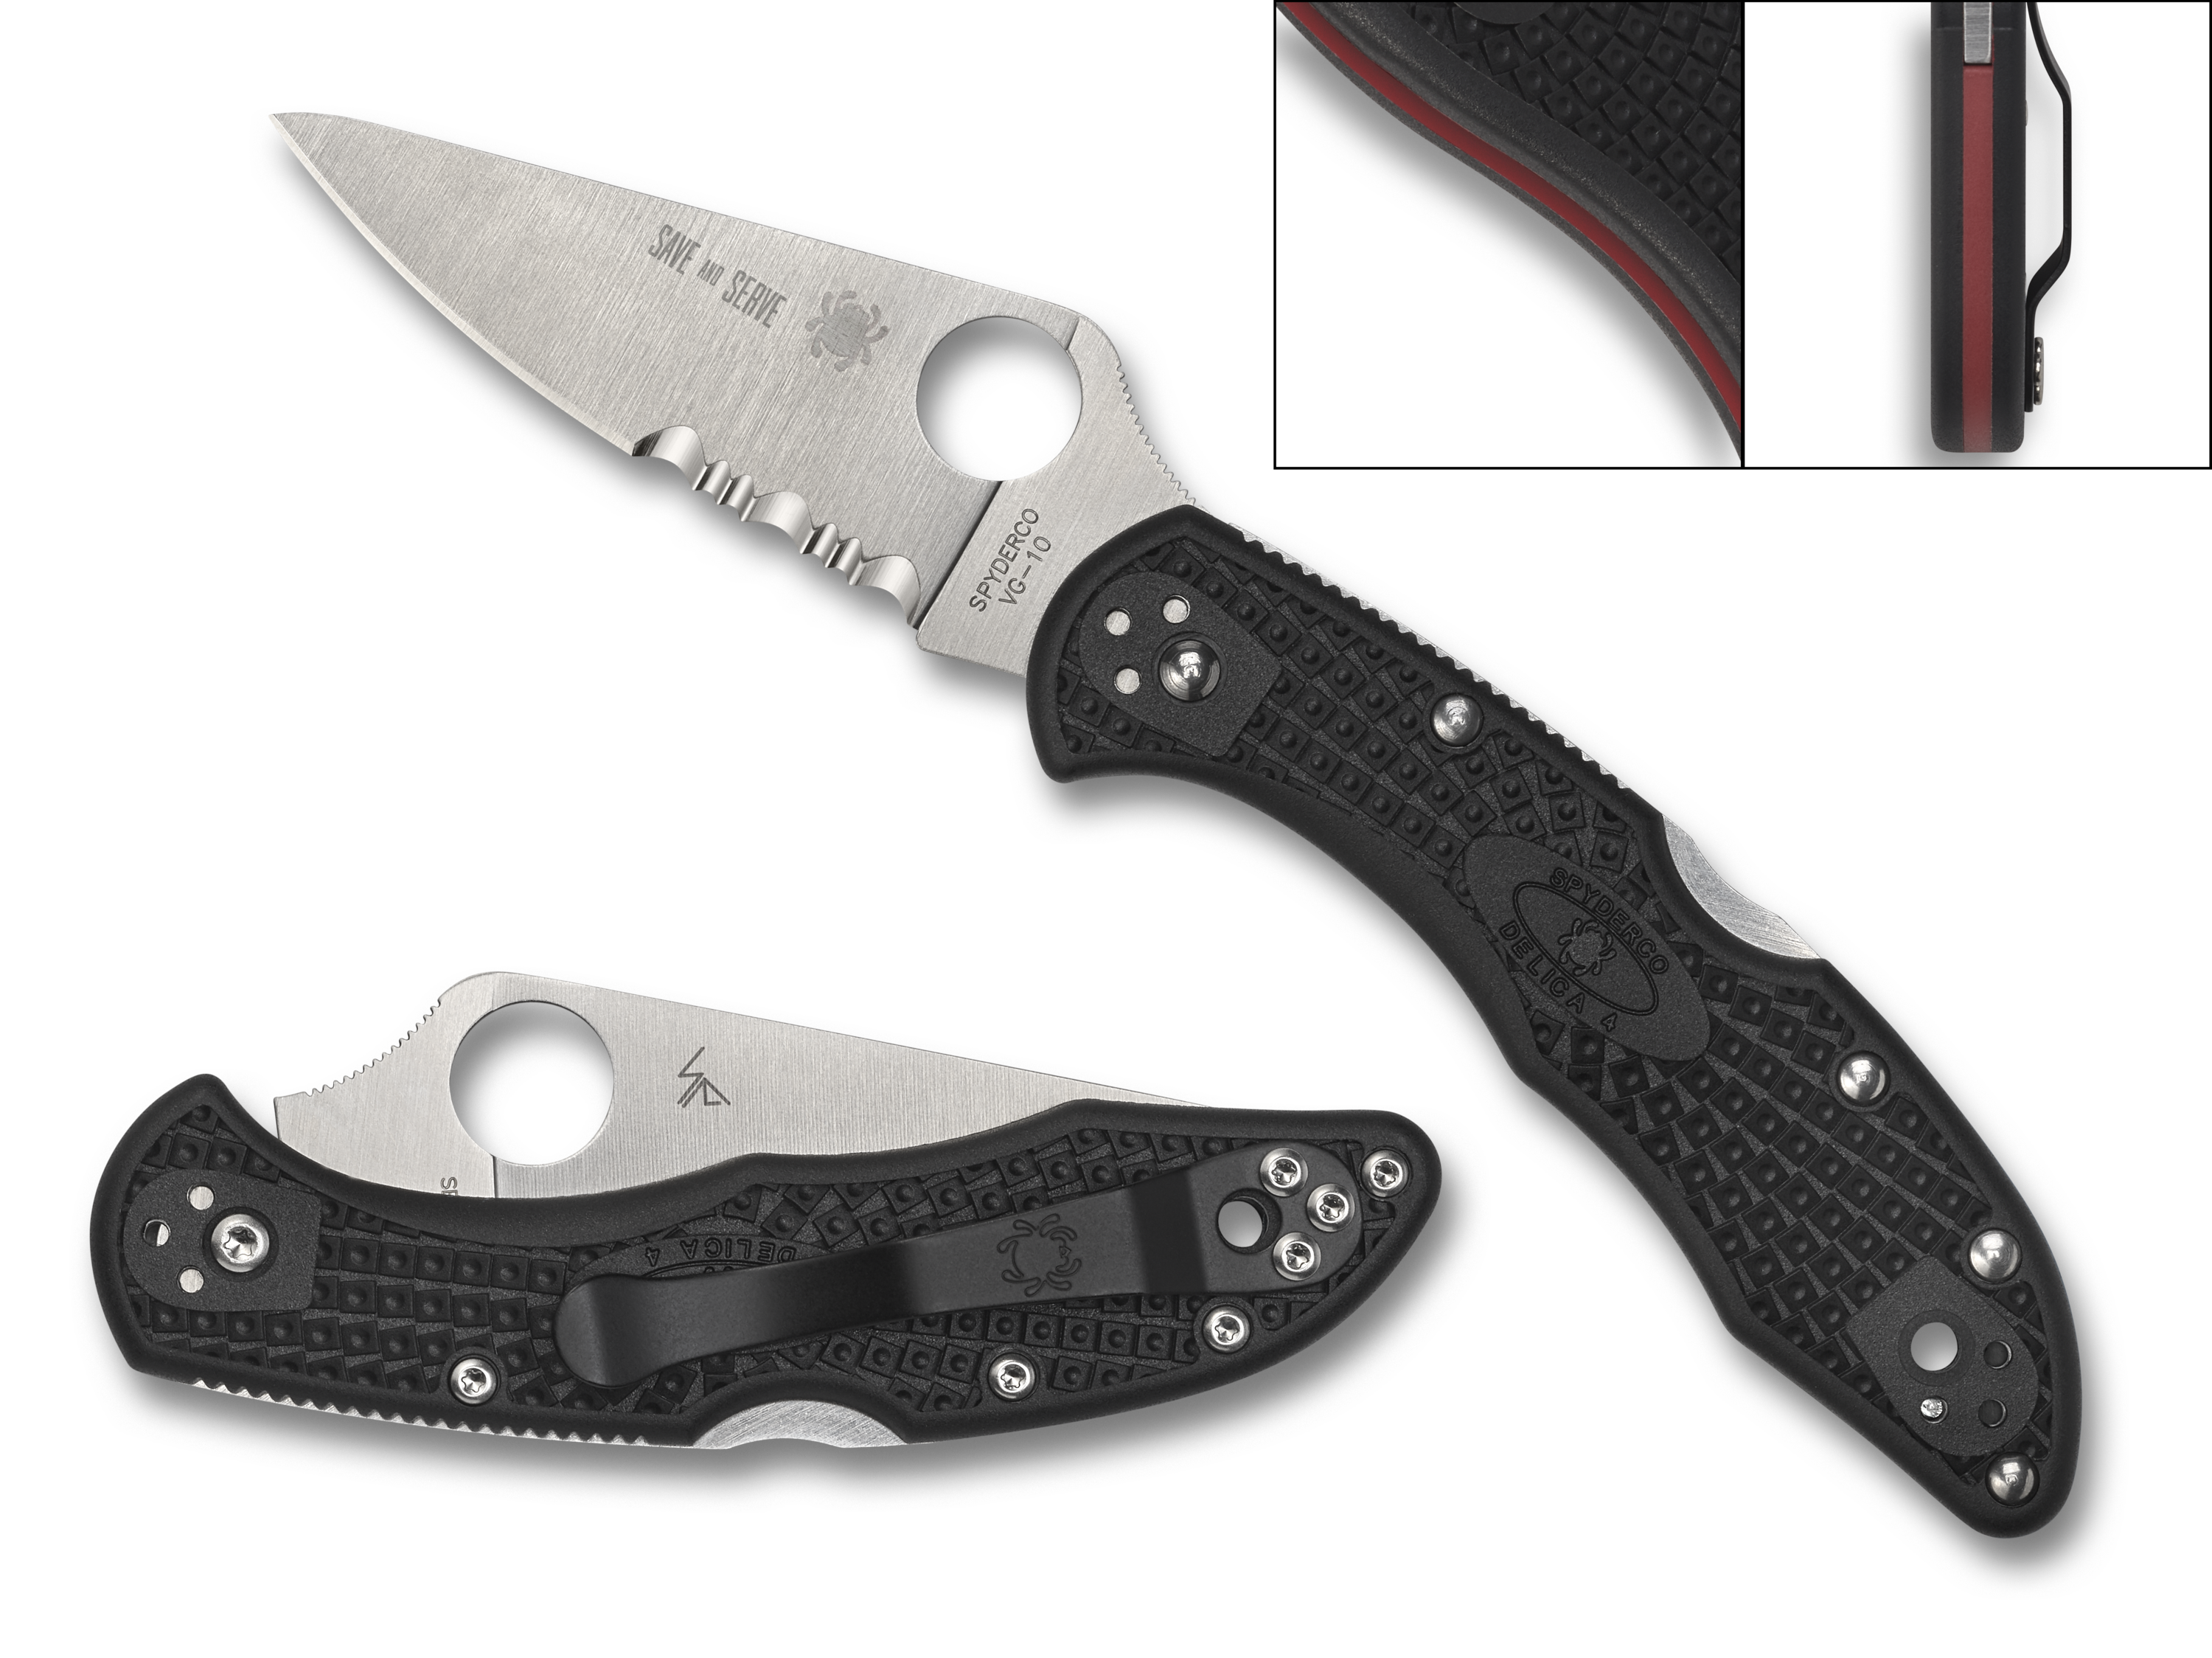 Spyderco Delica 4 - Thin Red Line - Black FRN - Partially Serrated VG-10 Blade - C11FPSBKRD - CLOSEOUT